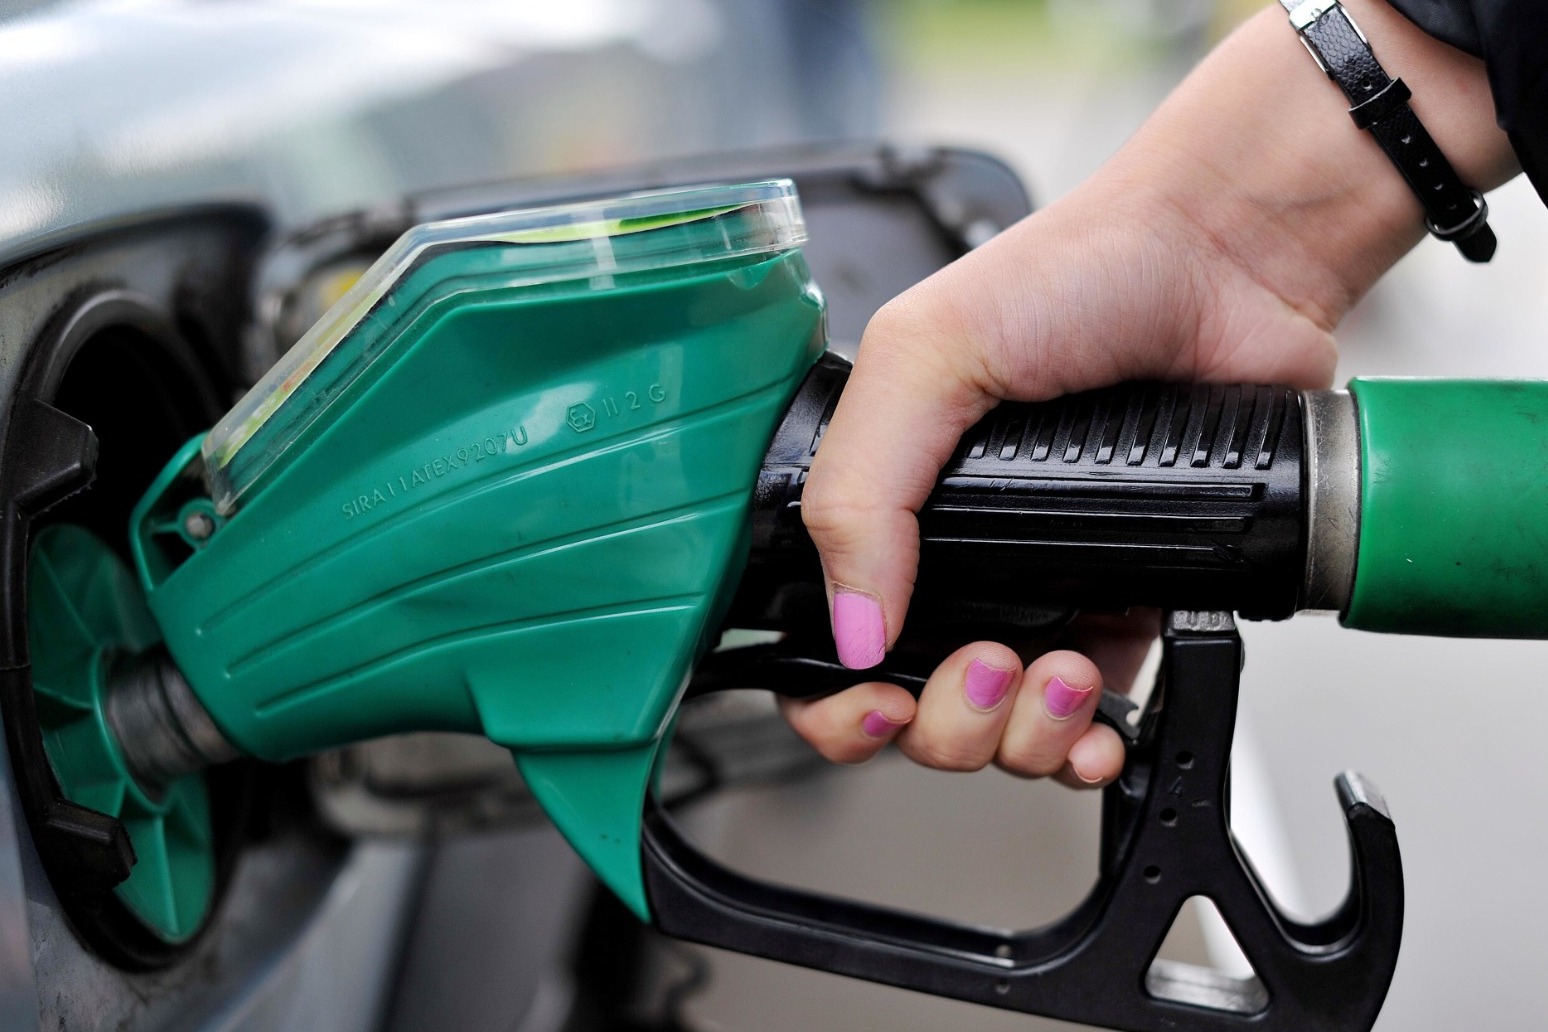 Diesel rocketed by 10p per litre in October 